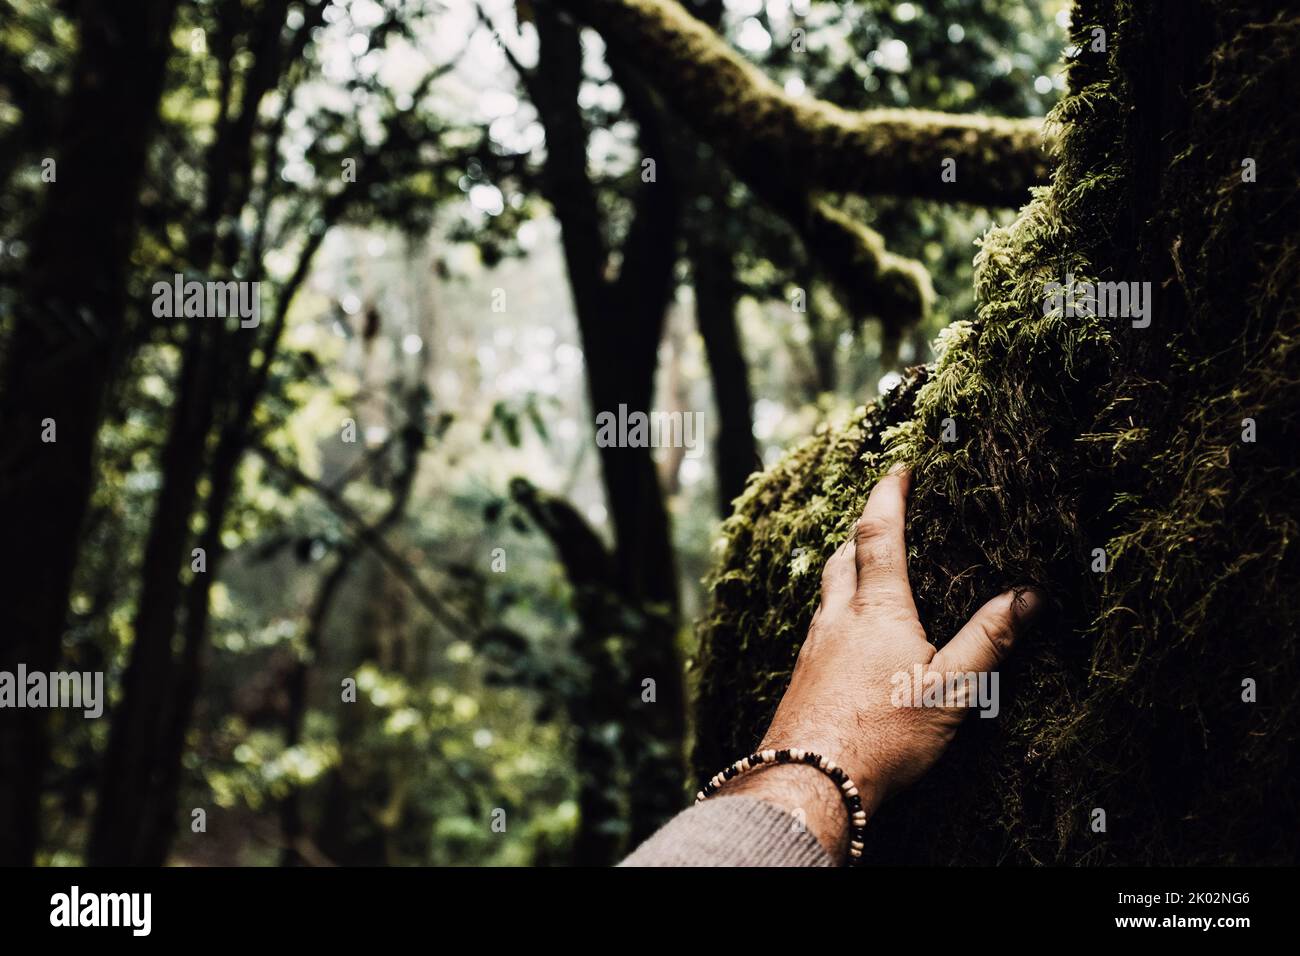 Human hand touching trunk tree with musk. Concept of nature protection and environment. Save forest from deforestation. Earth oxygen production. Deep woods and alternative natural lifestyle people Stock Photo